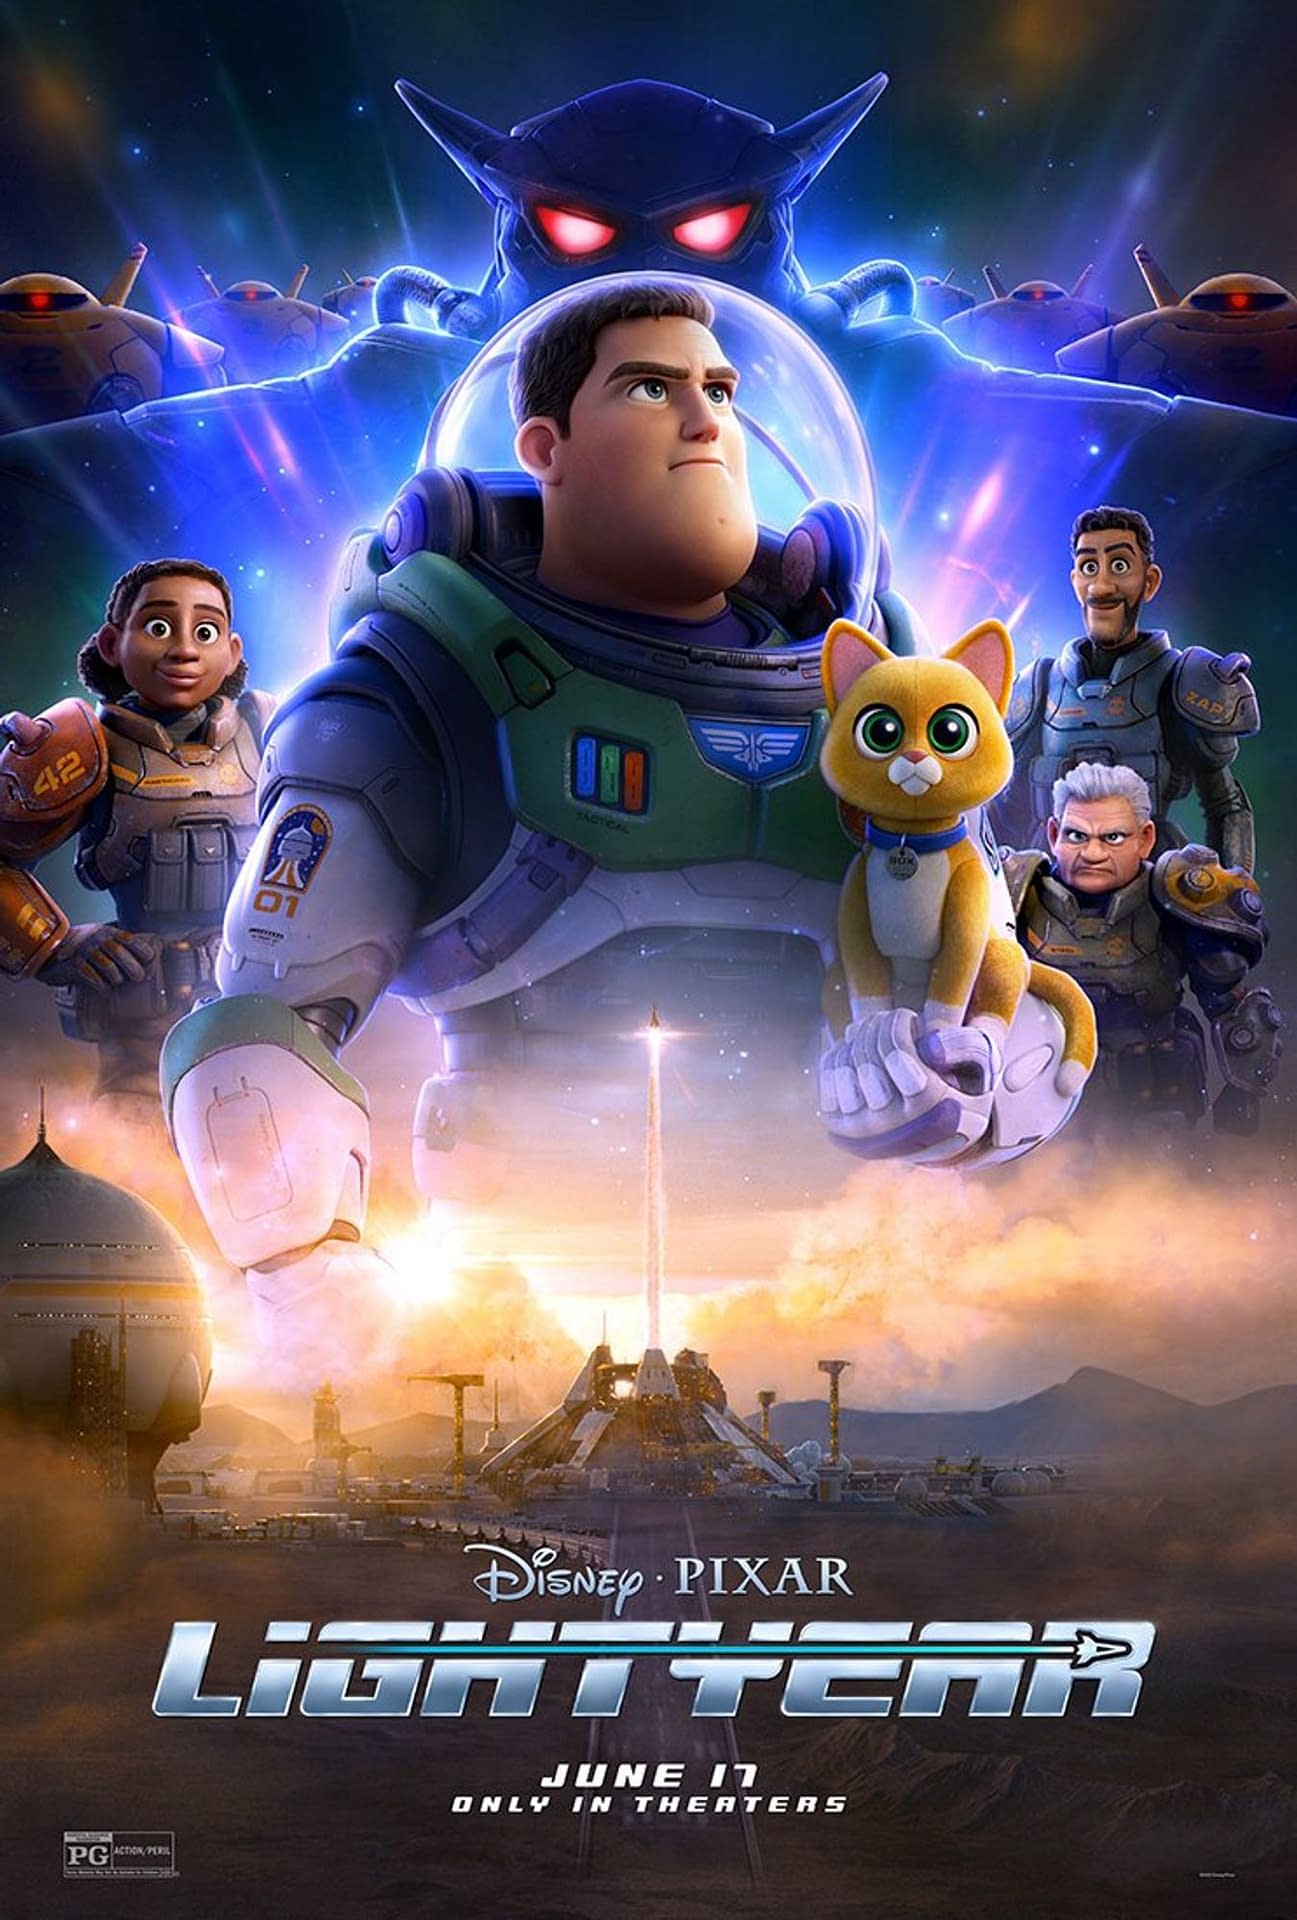 Lightyear: A New Poster, A Special Look, and a New Image